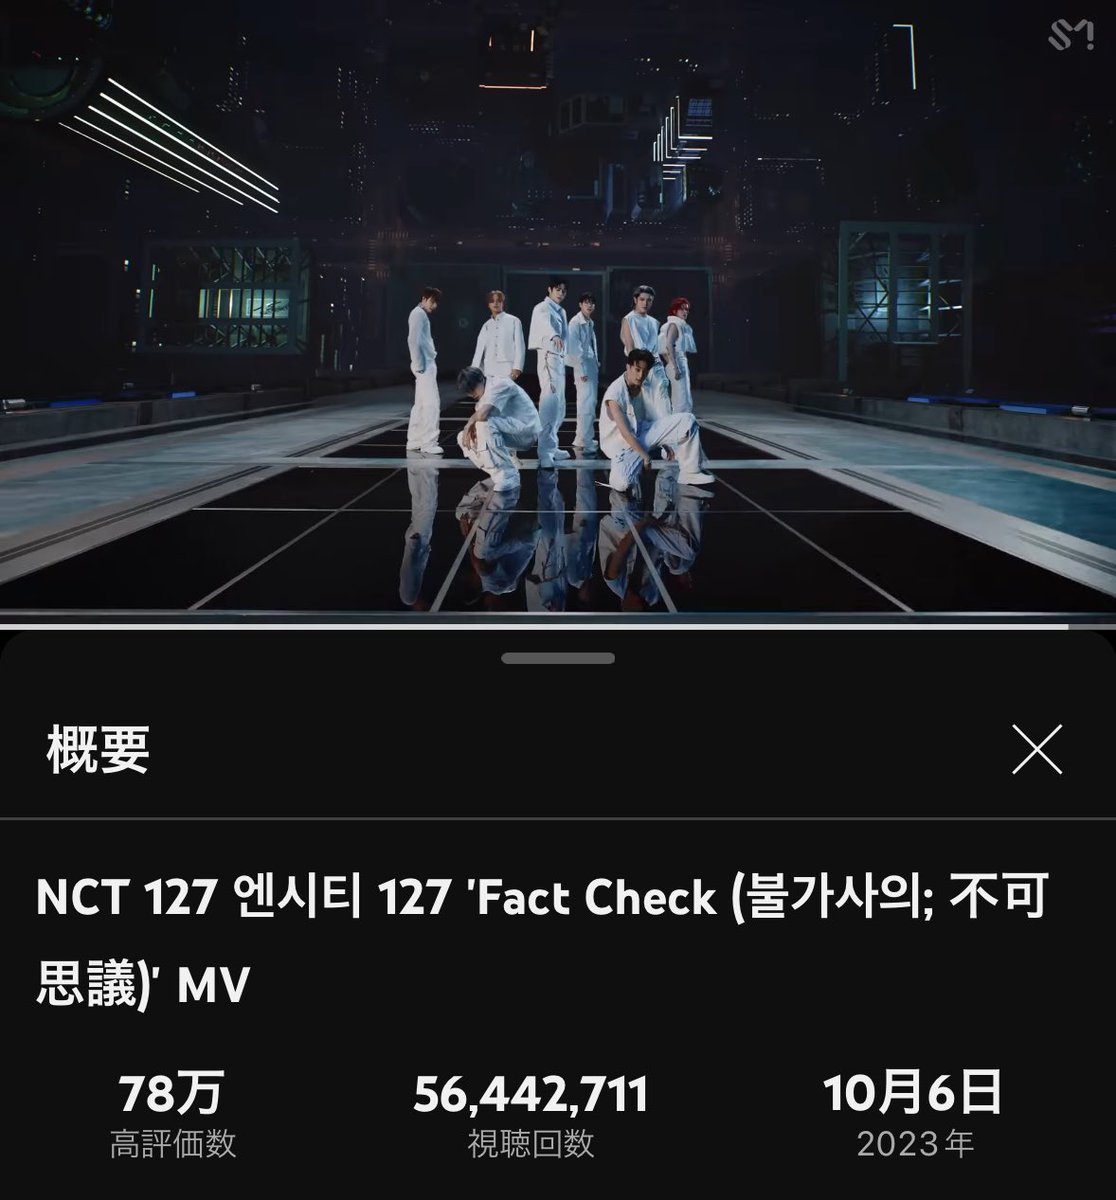 Let’s stream #NCT127_FactCheck 
Make a new record for fastest 100M views 

🔗youtu.be/vGuJuW0bDWA

#FactCheckTo100M 
#NCT127

【Previous record】
Kick It :10mths 20days
🔥Fact Check :10mths(8/6)